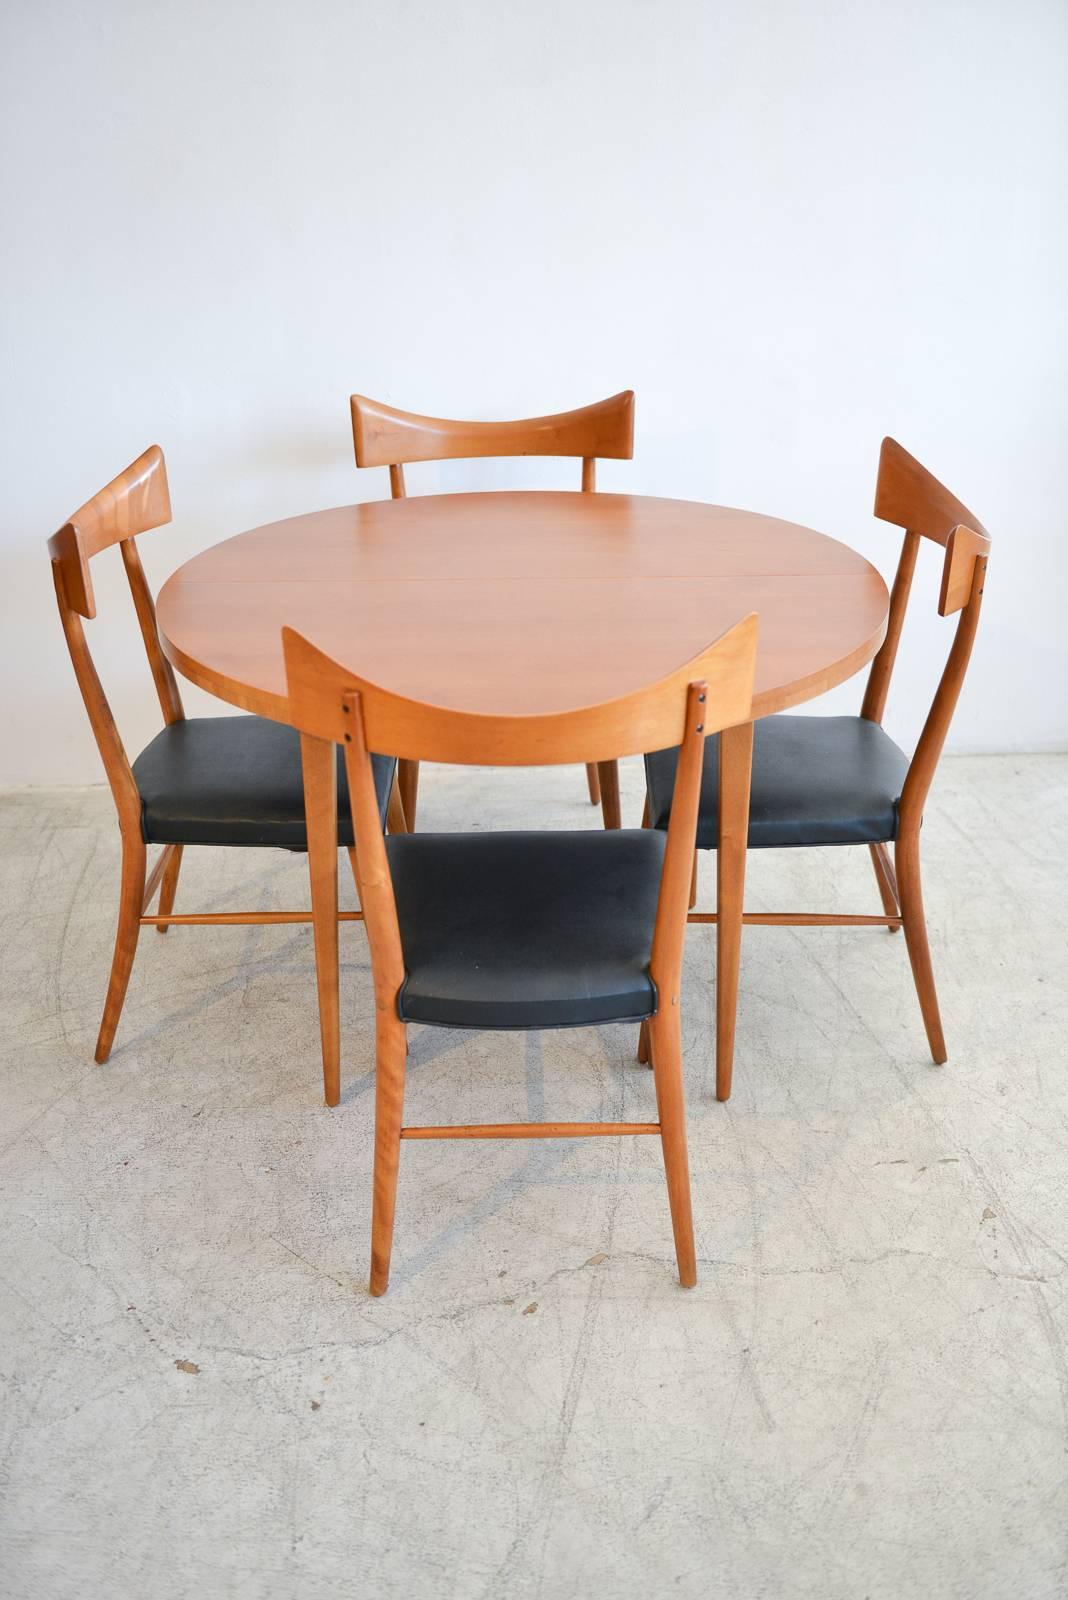 Paul McCobb model 1534 wingback (or bowtie) dining chairs, set of four, circa 1955. Solid maple with original black vinyl seats. Wood has been professionally restored. Matching dining table also available in a separate listing.

Measure 21